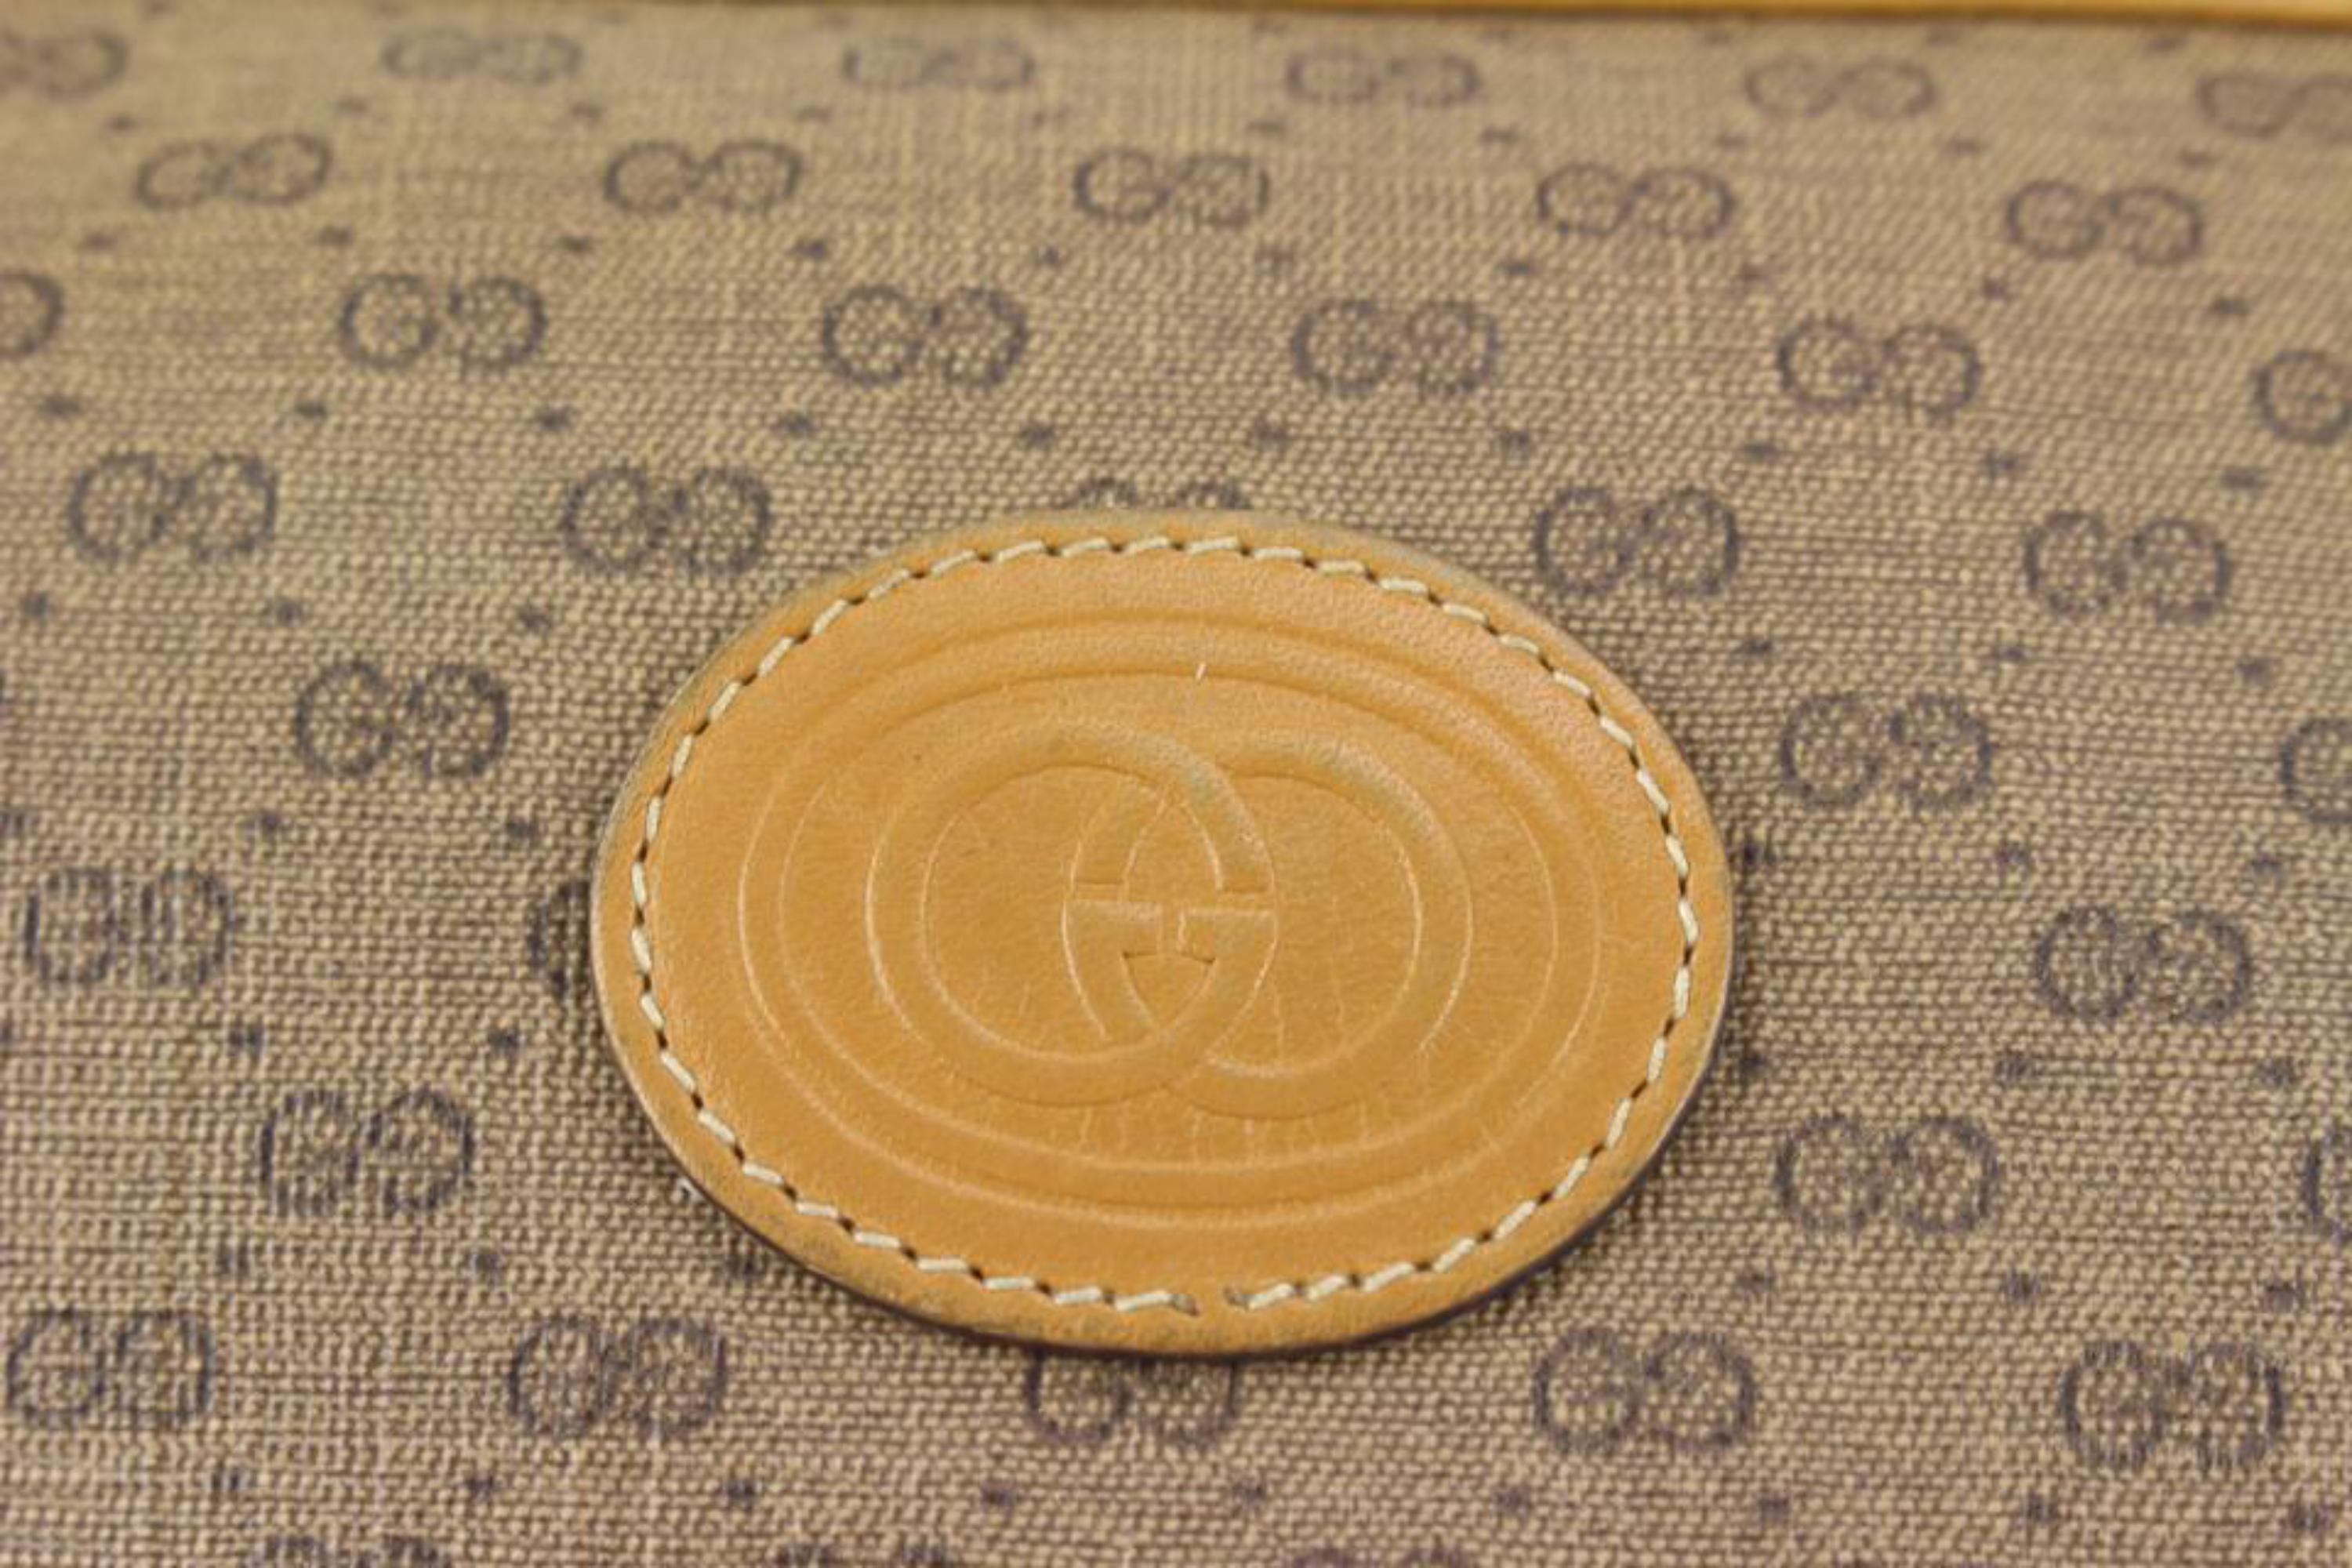 Gucci Micro GG Cosmetic Pouch Make Up Case 127g18 In Fair Condition For Sale In Dix hills, NY